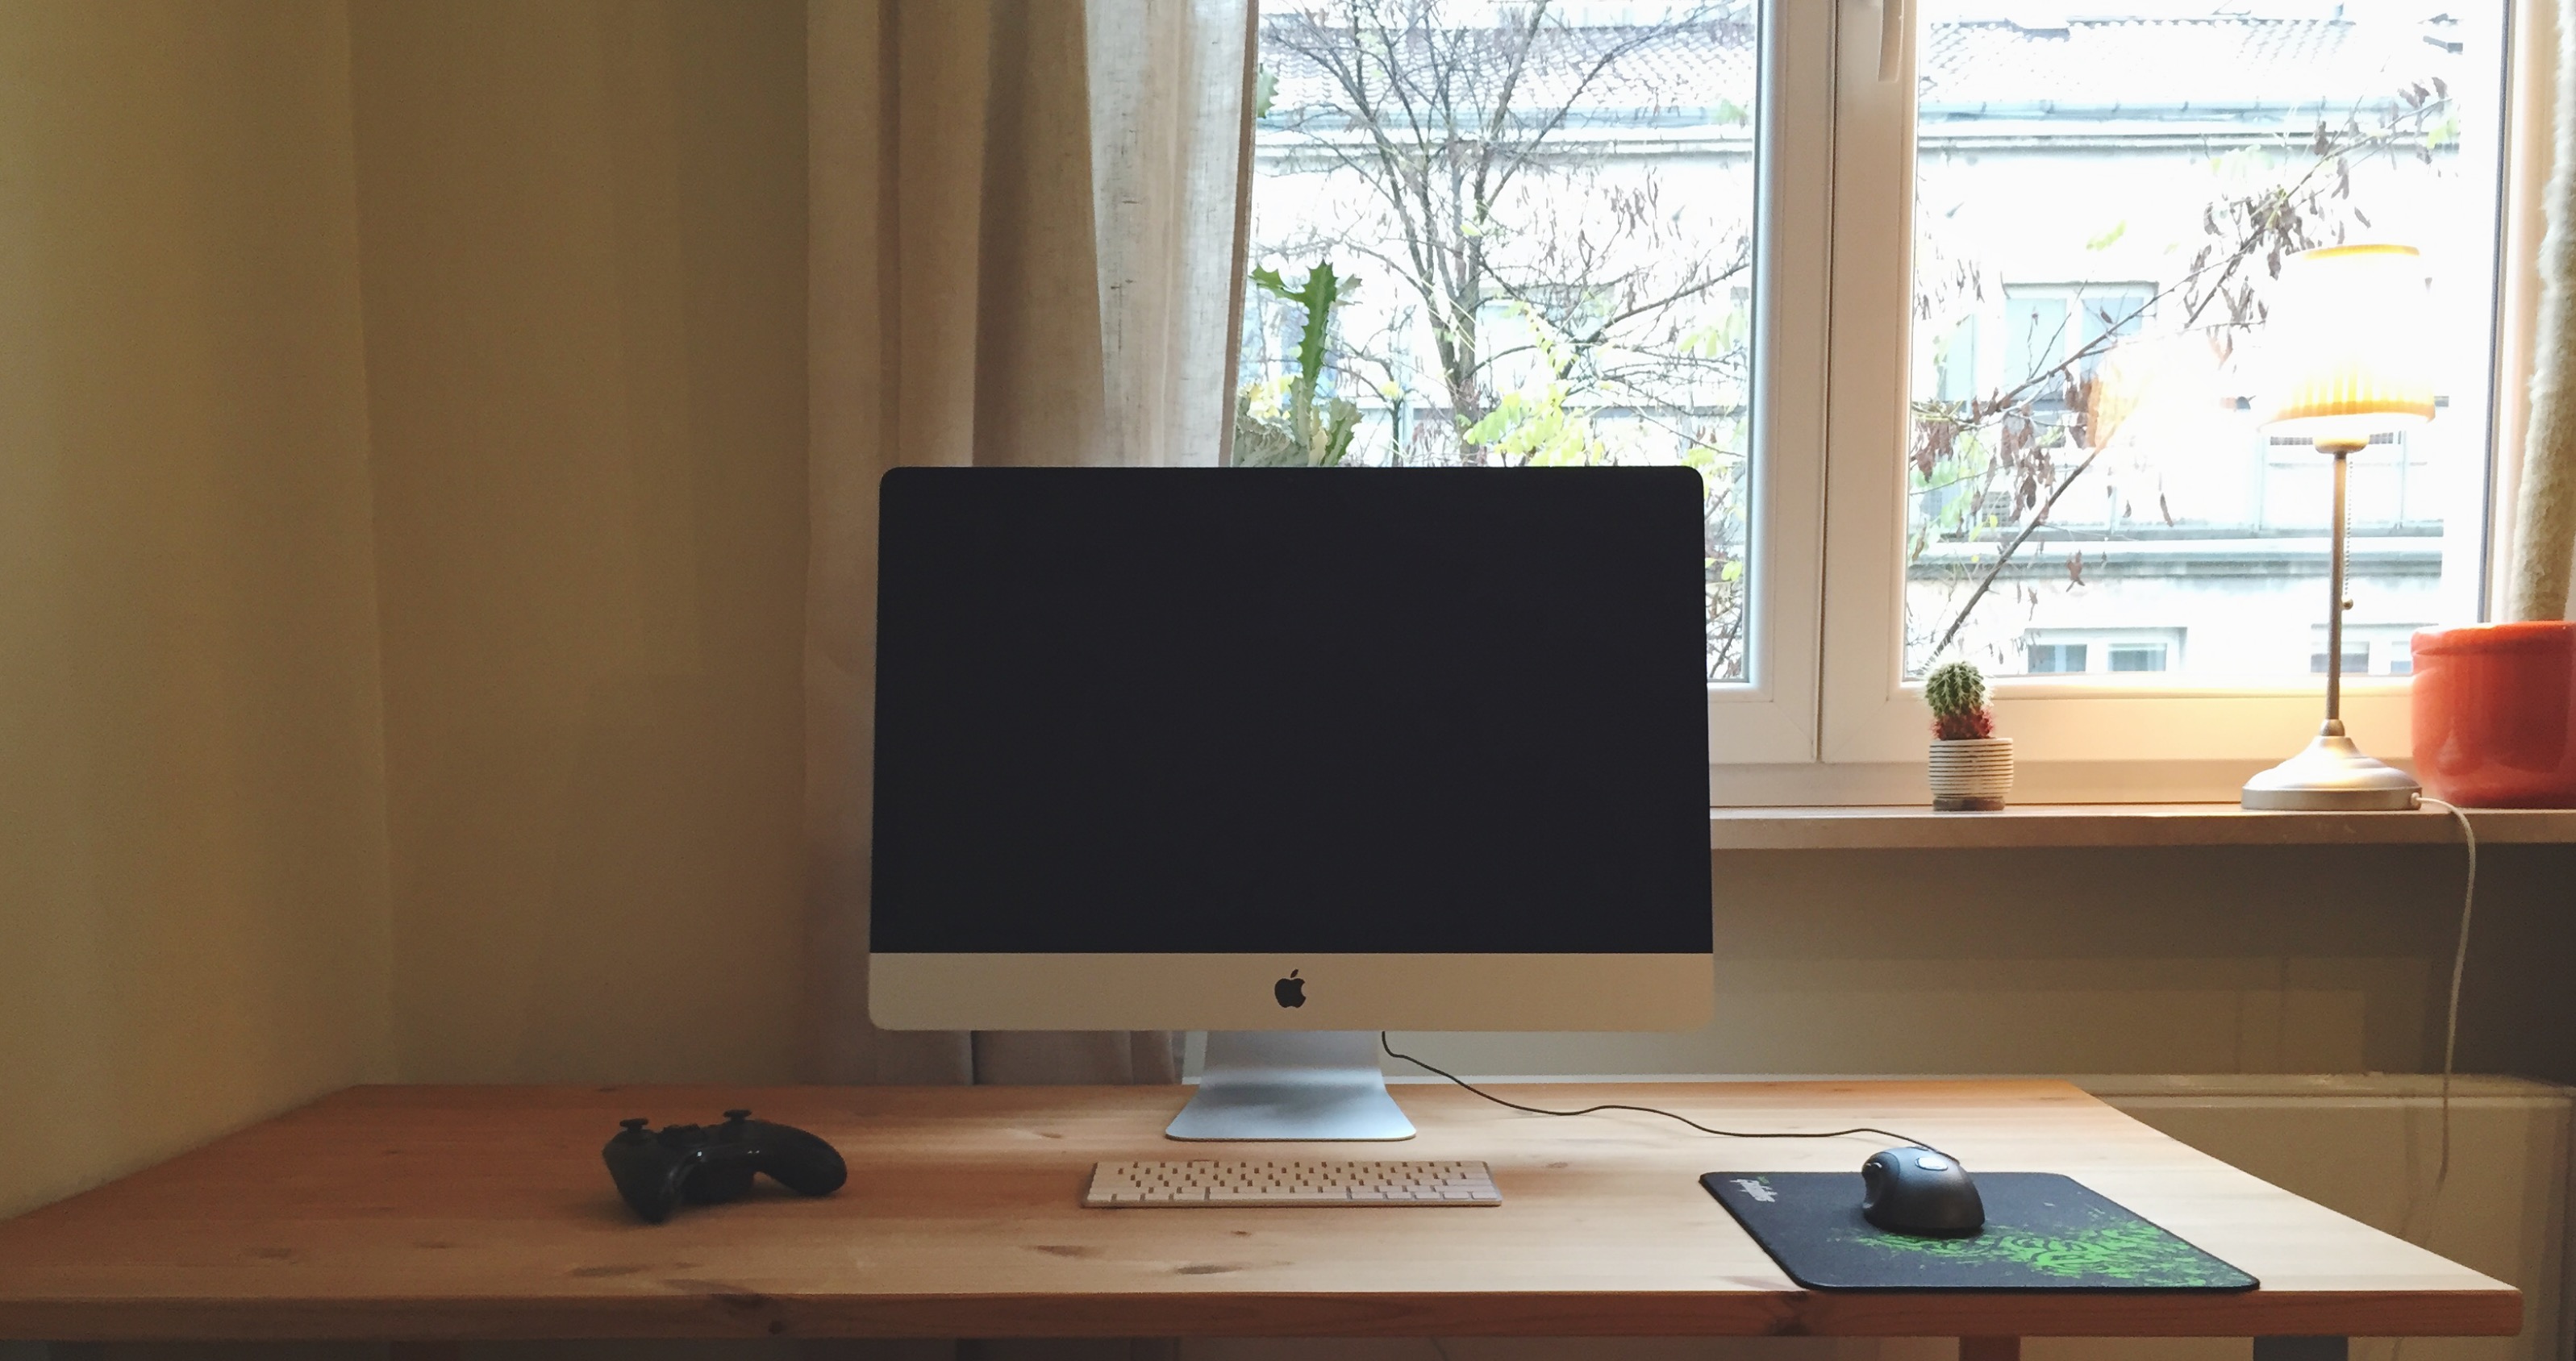 Grumpy Review Of The Late 2015 5k Imac